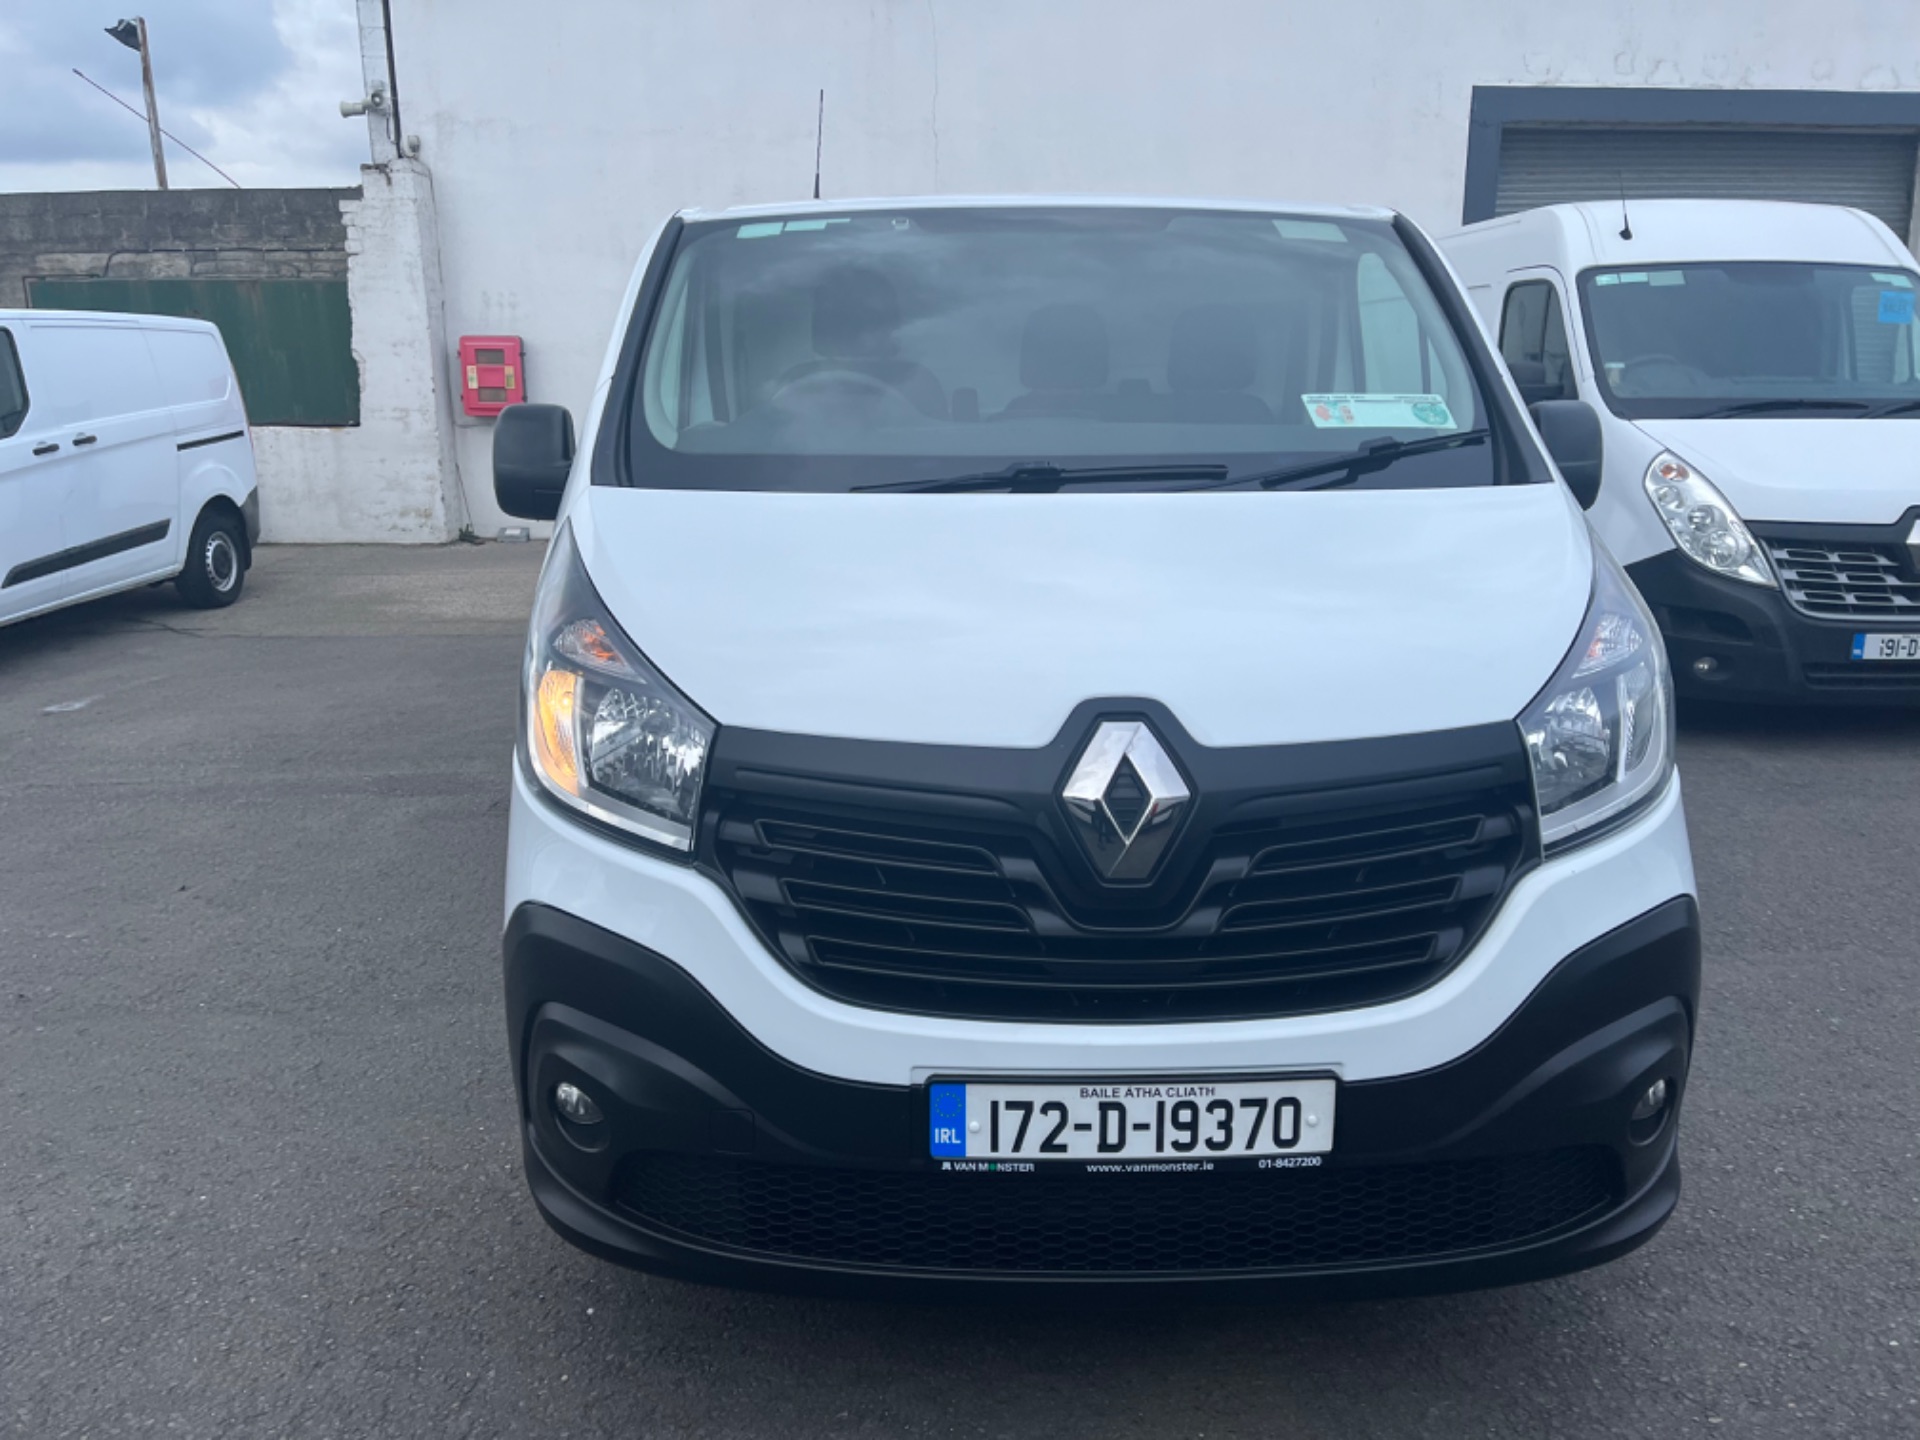 2017 Renault Trafic LL29 DCI 120 Business 3DR (172D19370) Thumbnail 2